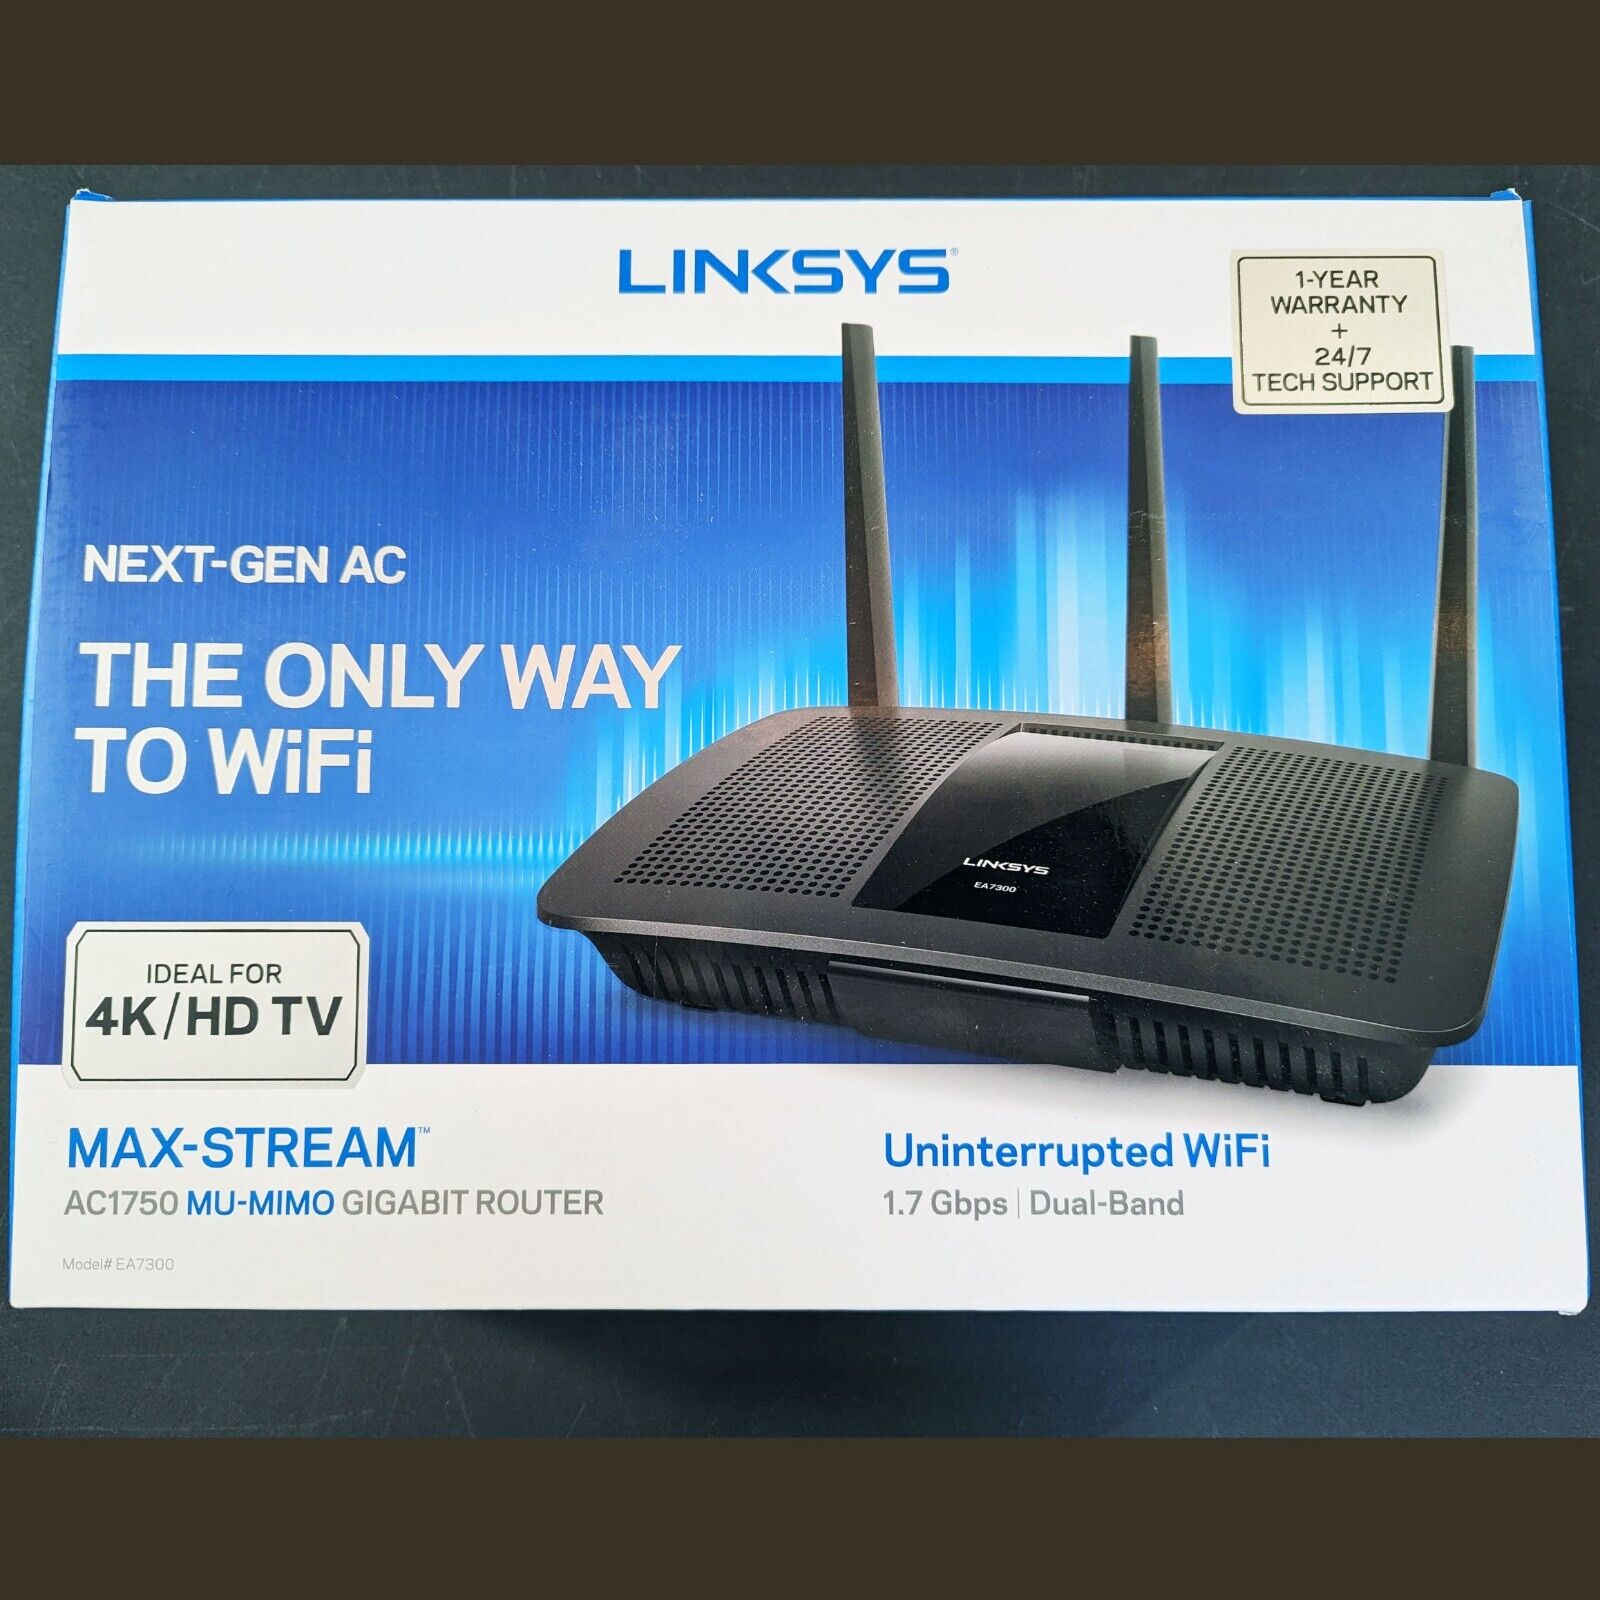 Linksys EA7300 Max-Stream: AC1750 Dual-Band Wi-Fi Router (Used)